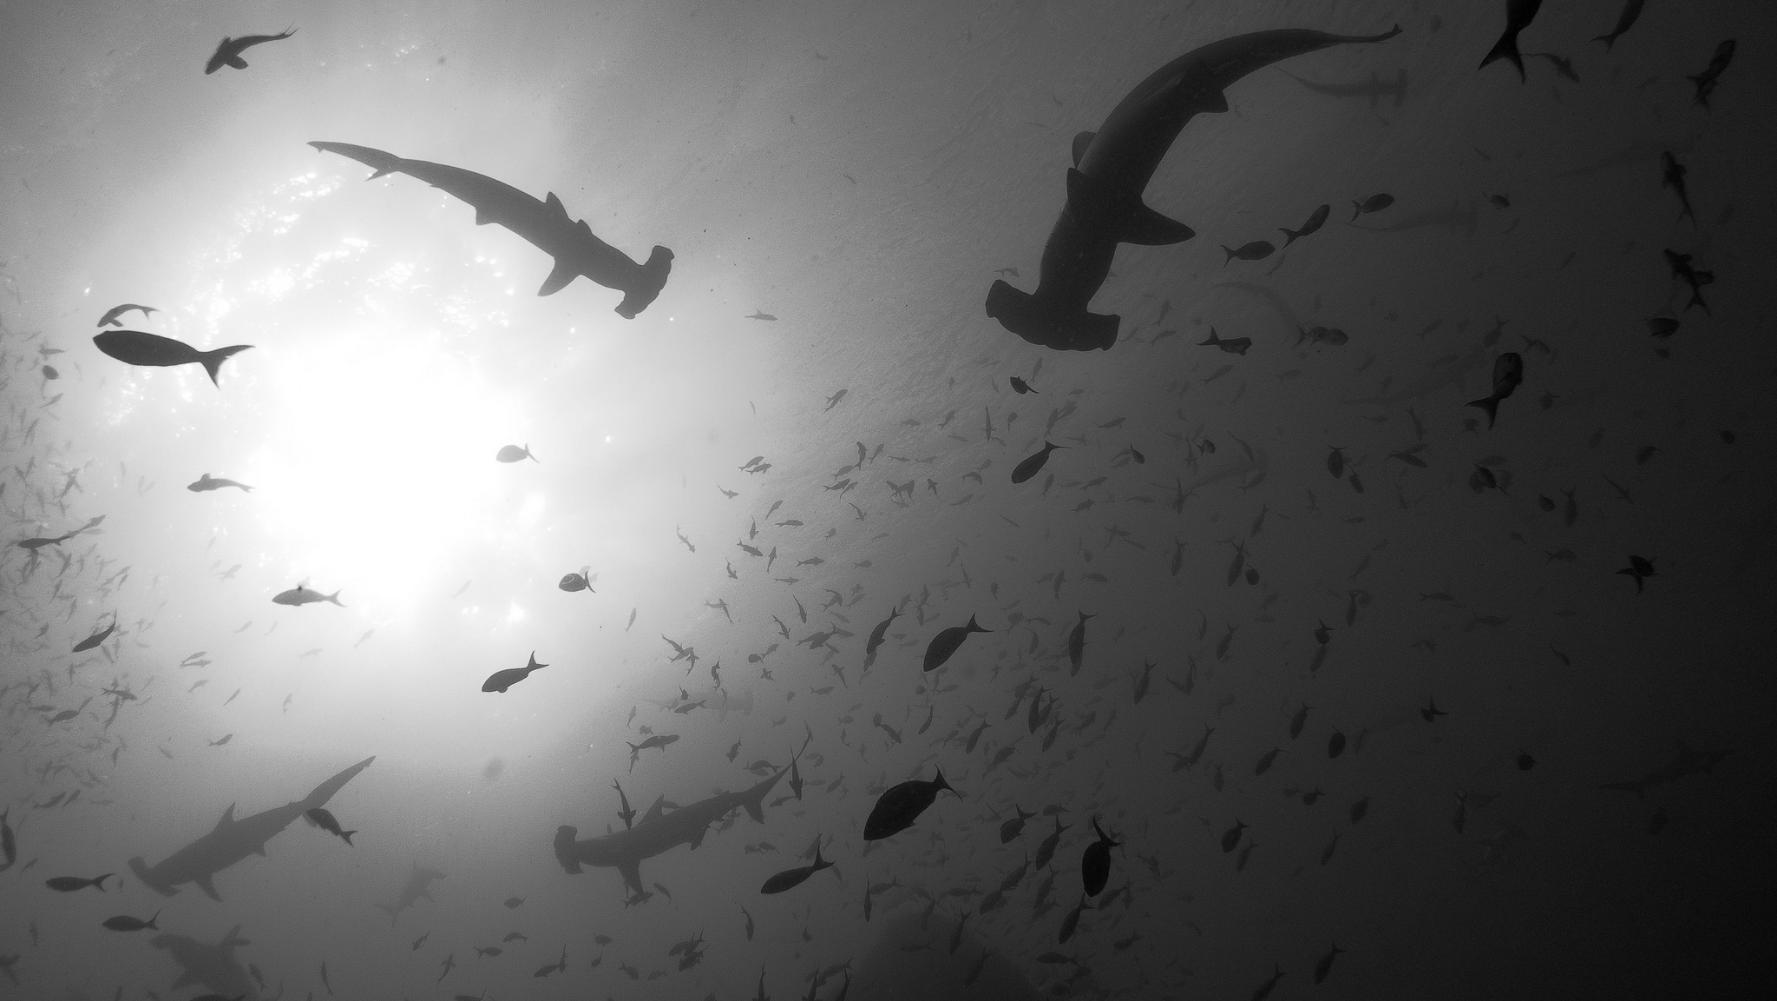 Scuba Divers Share The Strangest Thing That Has Ever Happened To Them Underwater